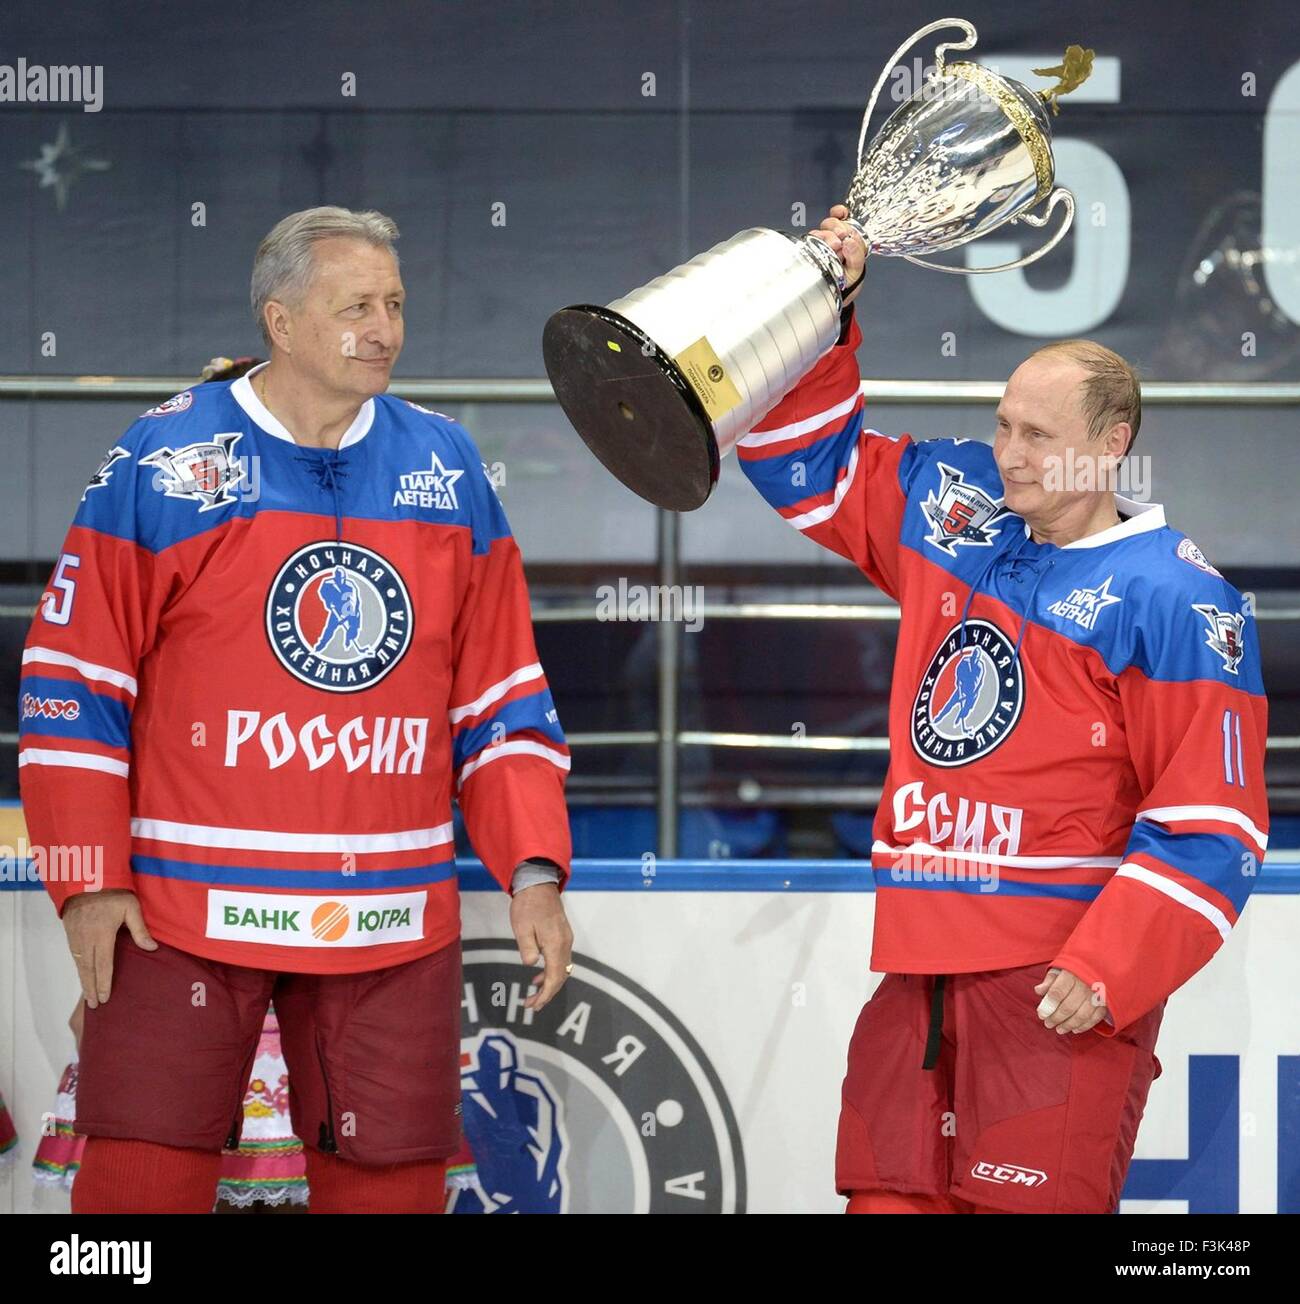 Russian President Vladimir Putin holds a trophy as Alexander Yakushev looks on after an ice hockey match between former NHL stars and Russian government officials at the Shayba Arena October 7, 2015 in Sochi, Russia. The game took place on Putin's 63rd birthday. Stock Photo